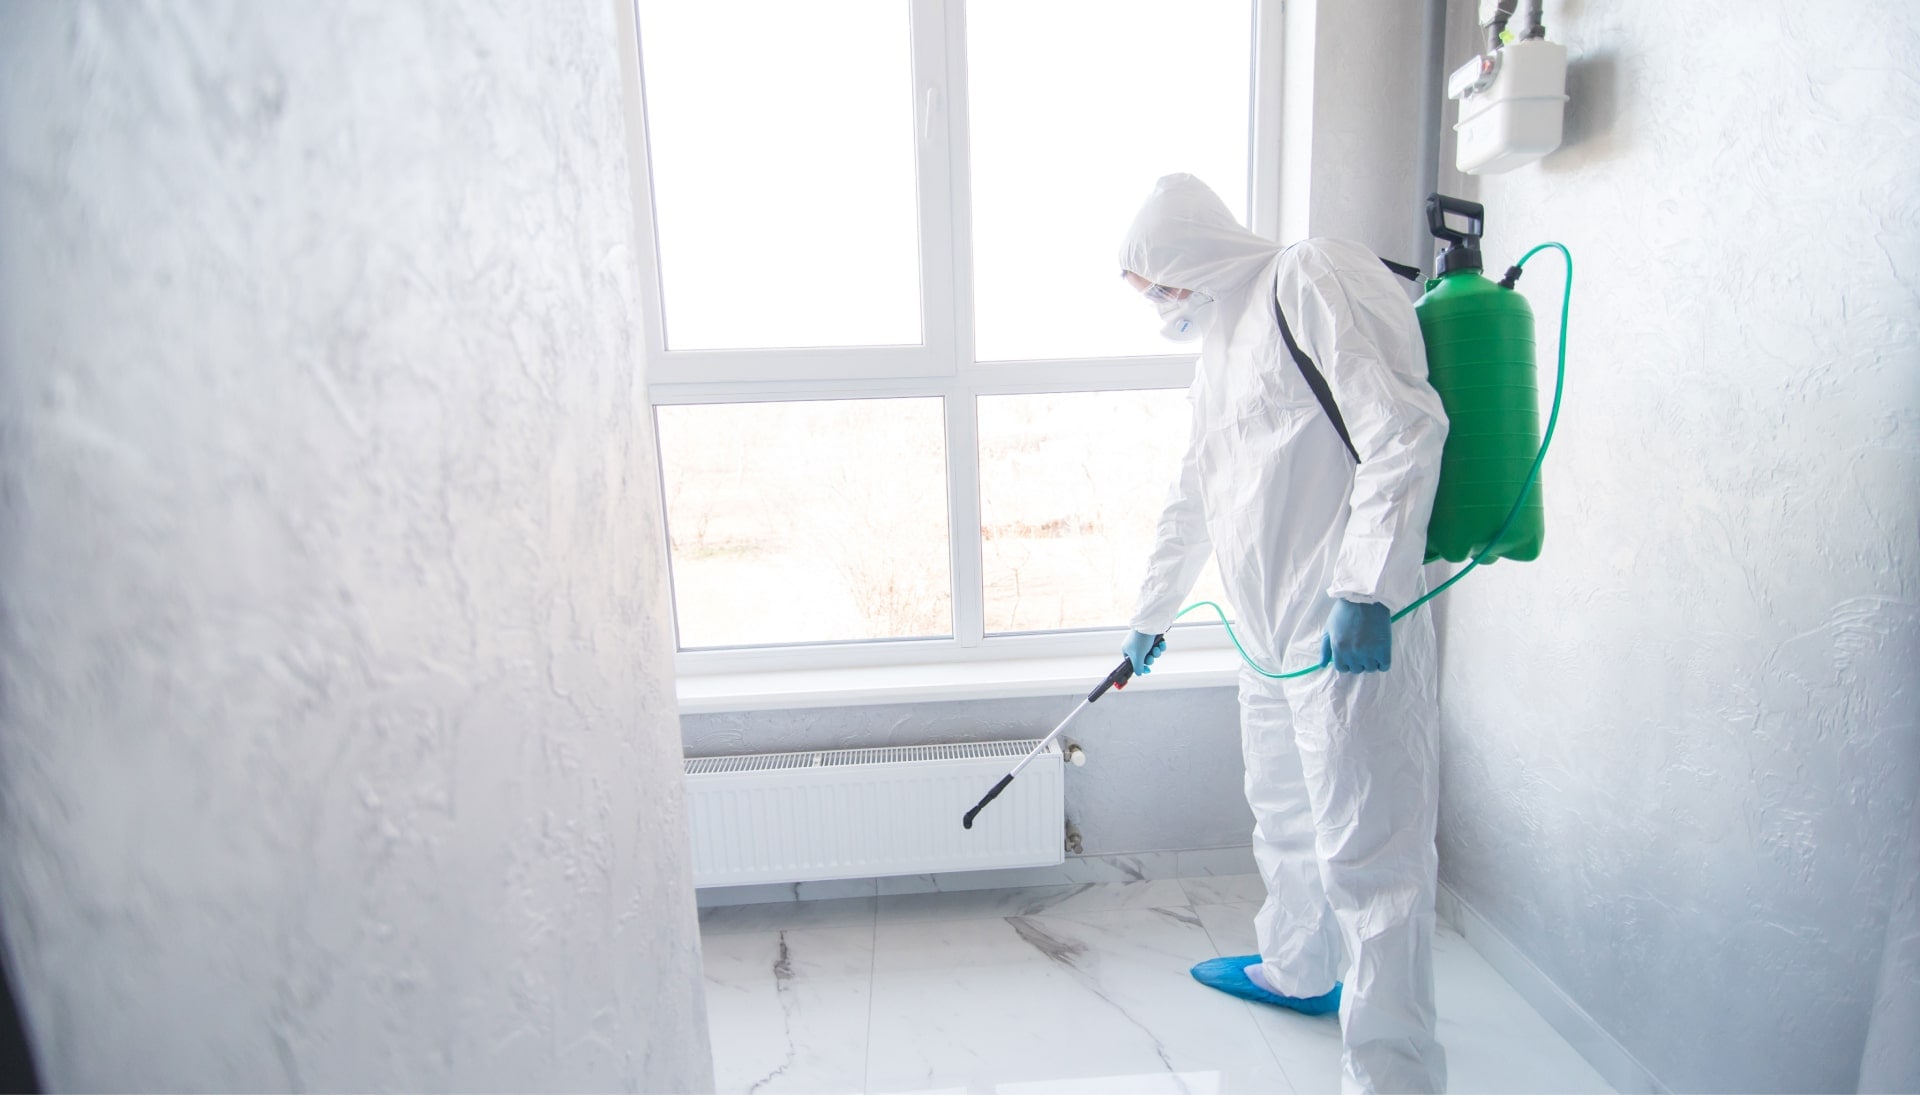 We provide the highest-quality mold inspection, testing, and removal services in the Lexington, Kentucky area.